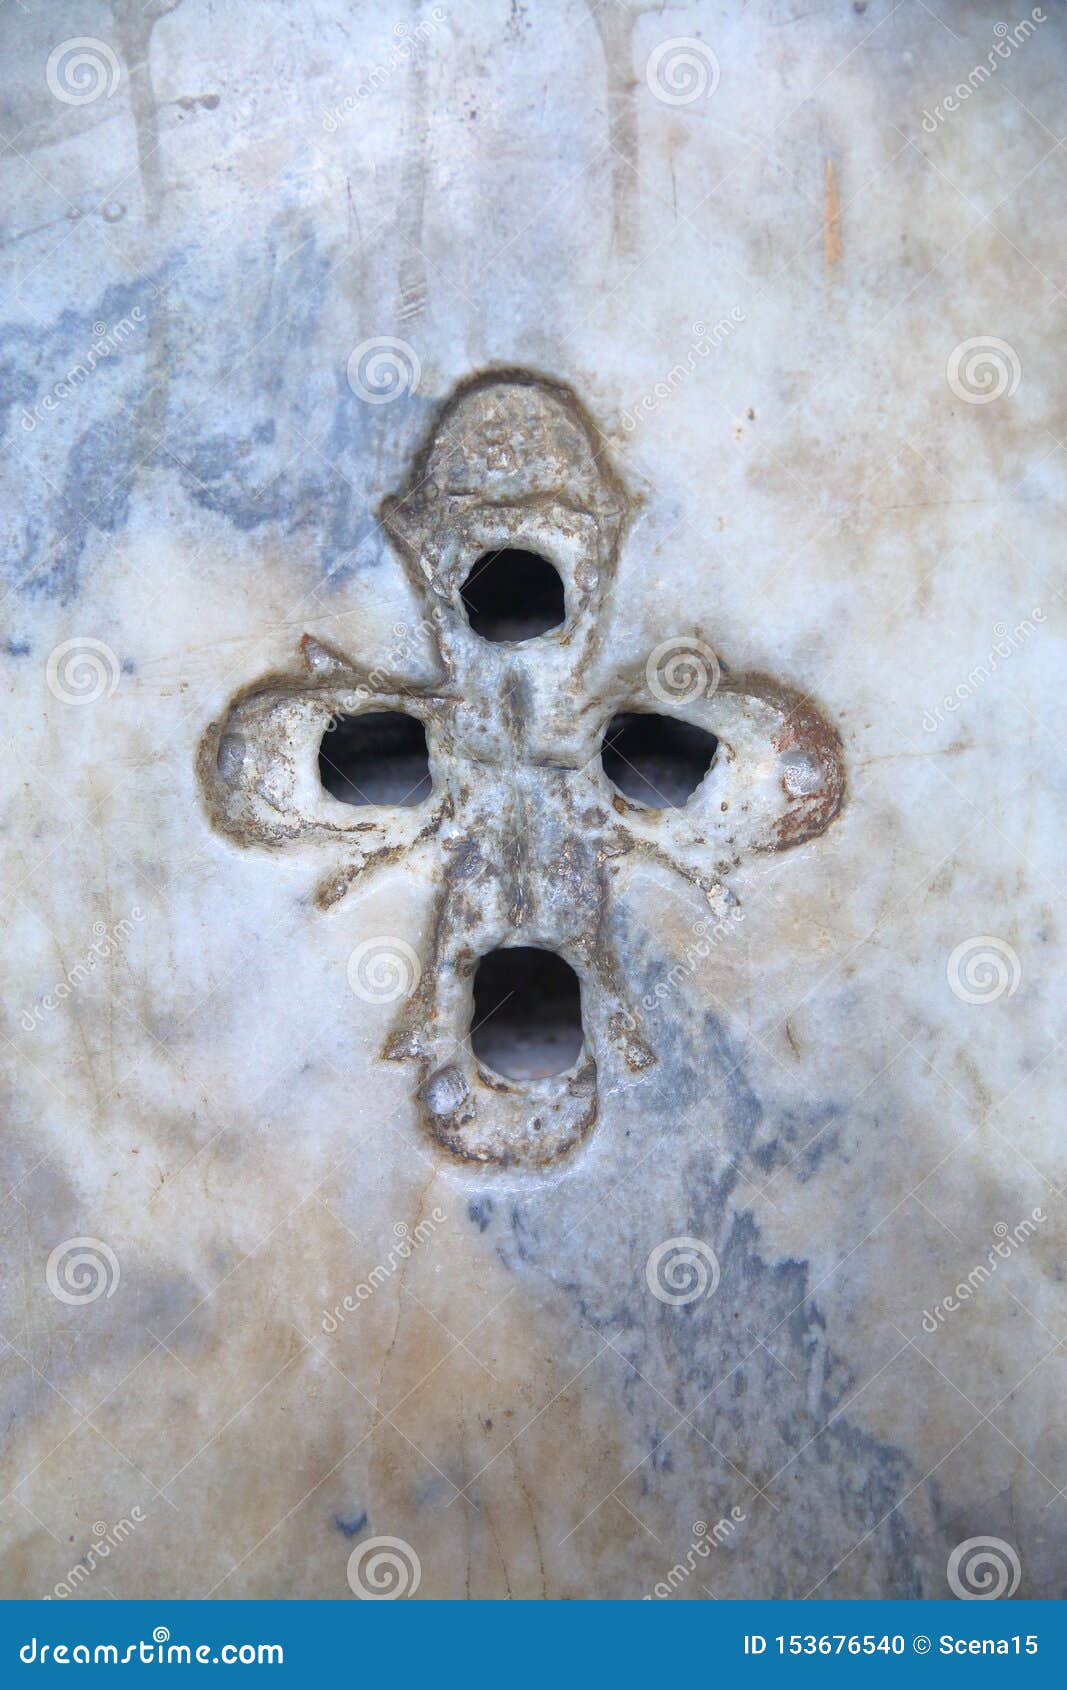 Ancient Christian Cross With Four Holes In The Marble Wall Inside The Hagia Sophia In Istanbul 